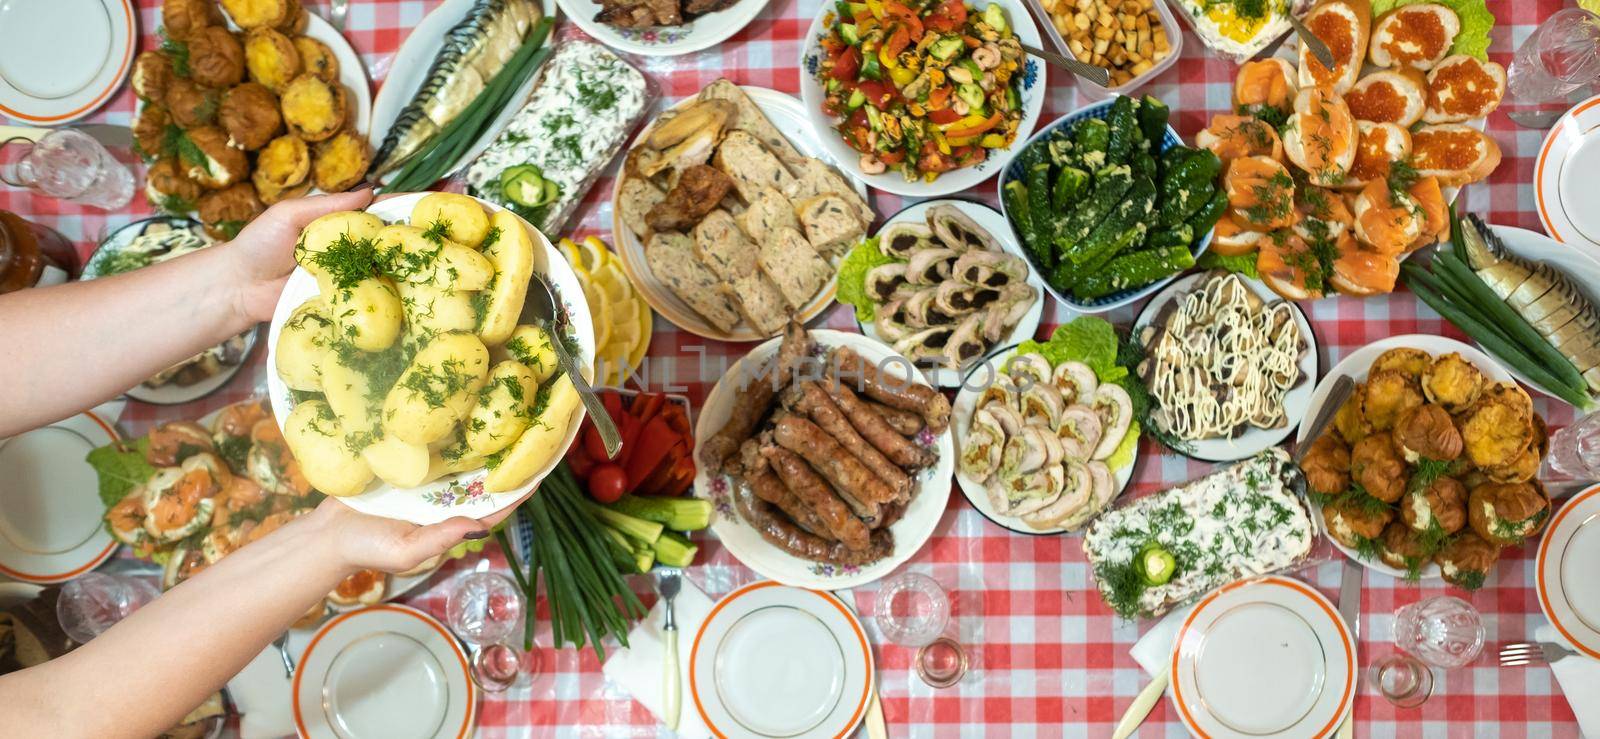 A lot of different food on the Banquet table and served boiled potatoes with dill.A large number of ready-made dishes on the table.Holiday at the table.